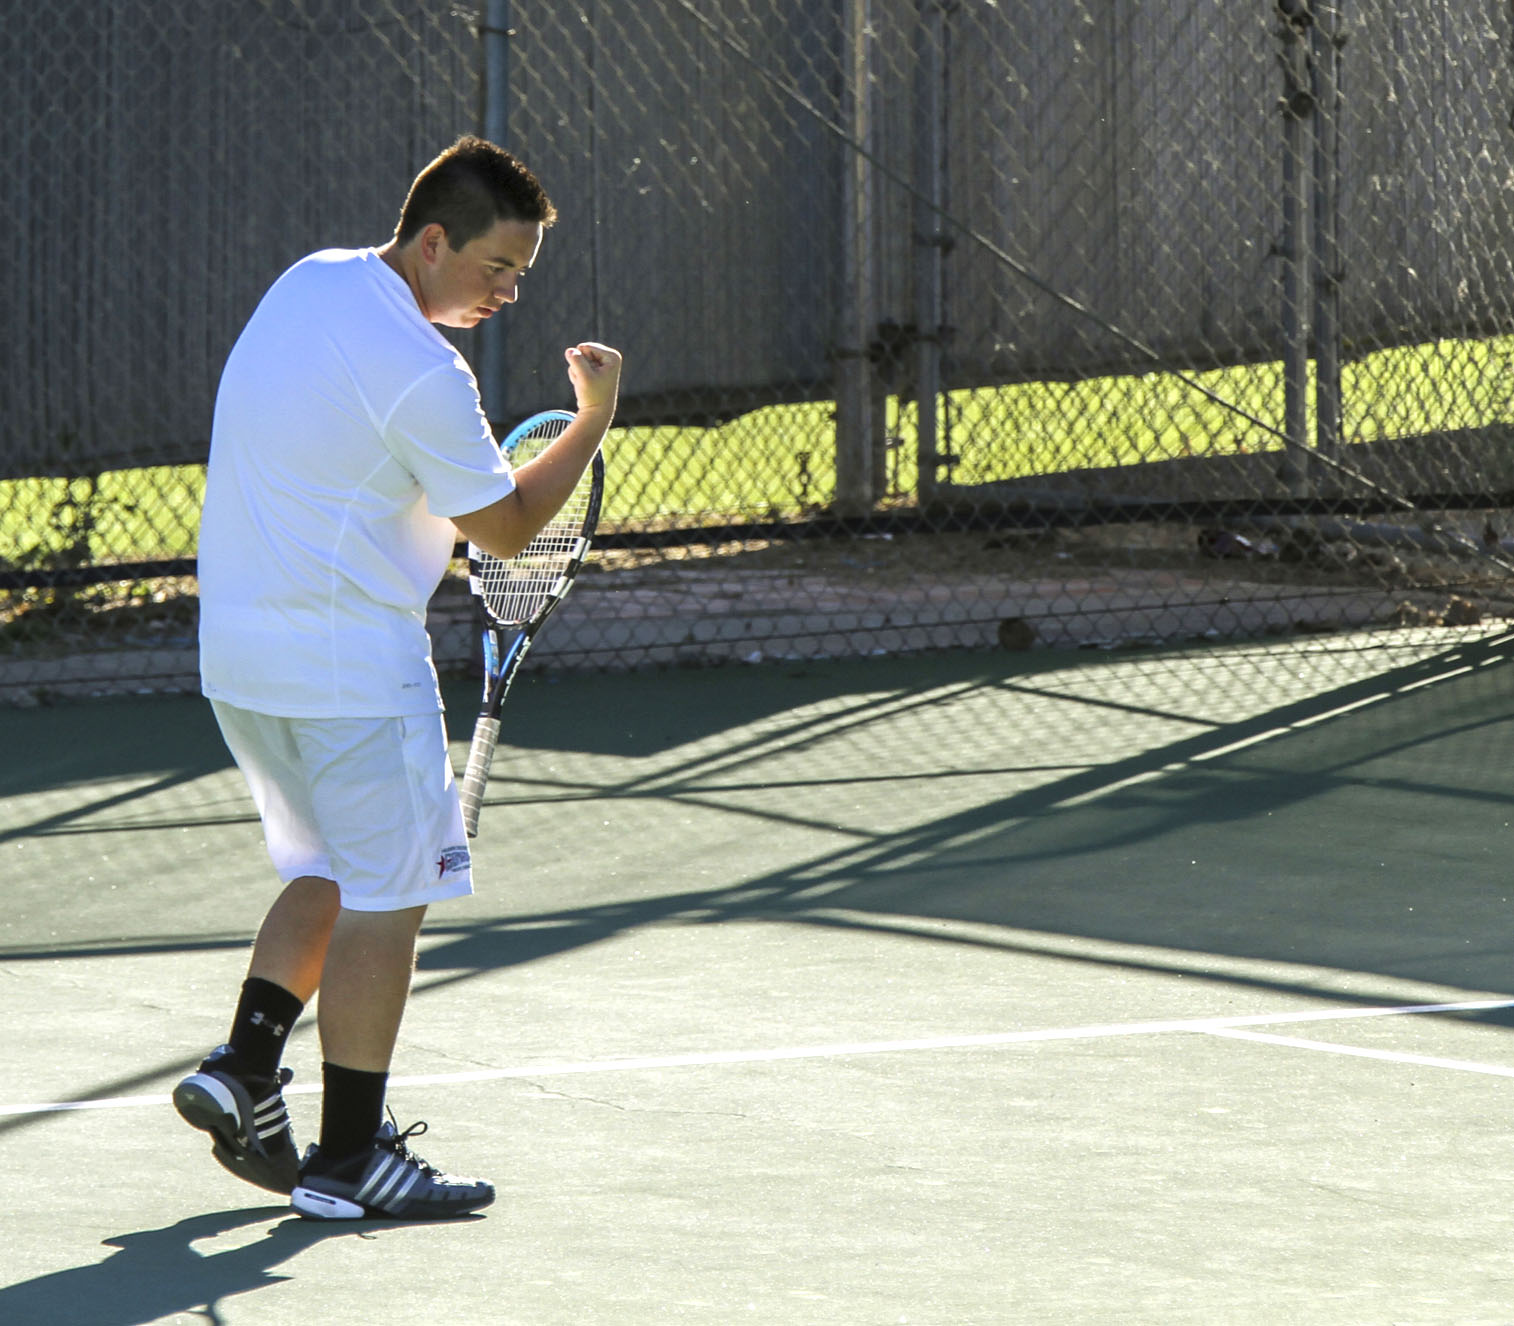 Feb. 12, 2015 | Palomar tennis player Vince Rivera celebrates winning a point during the first set. The Comets hosted visiting Mt. San Jacinto college. The Eagles beat the Comets 6-3 Thursday afternoon on the Comets courts. (Philip Farry/The Telescope)